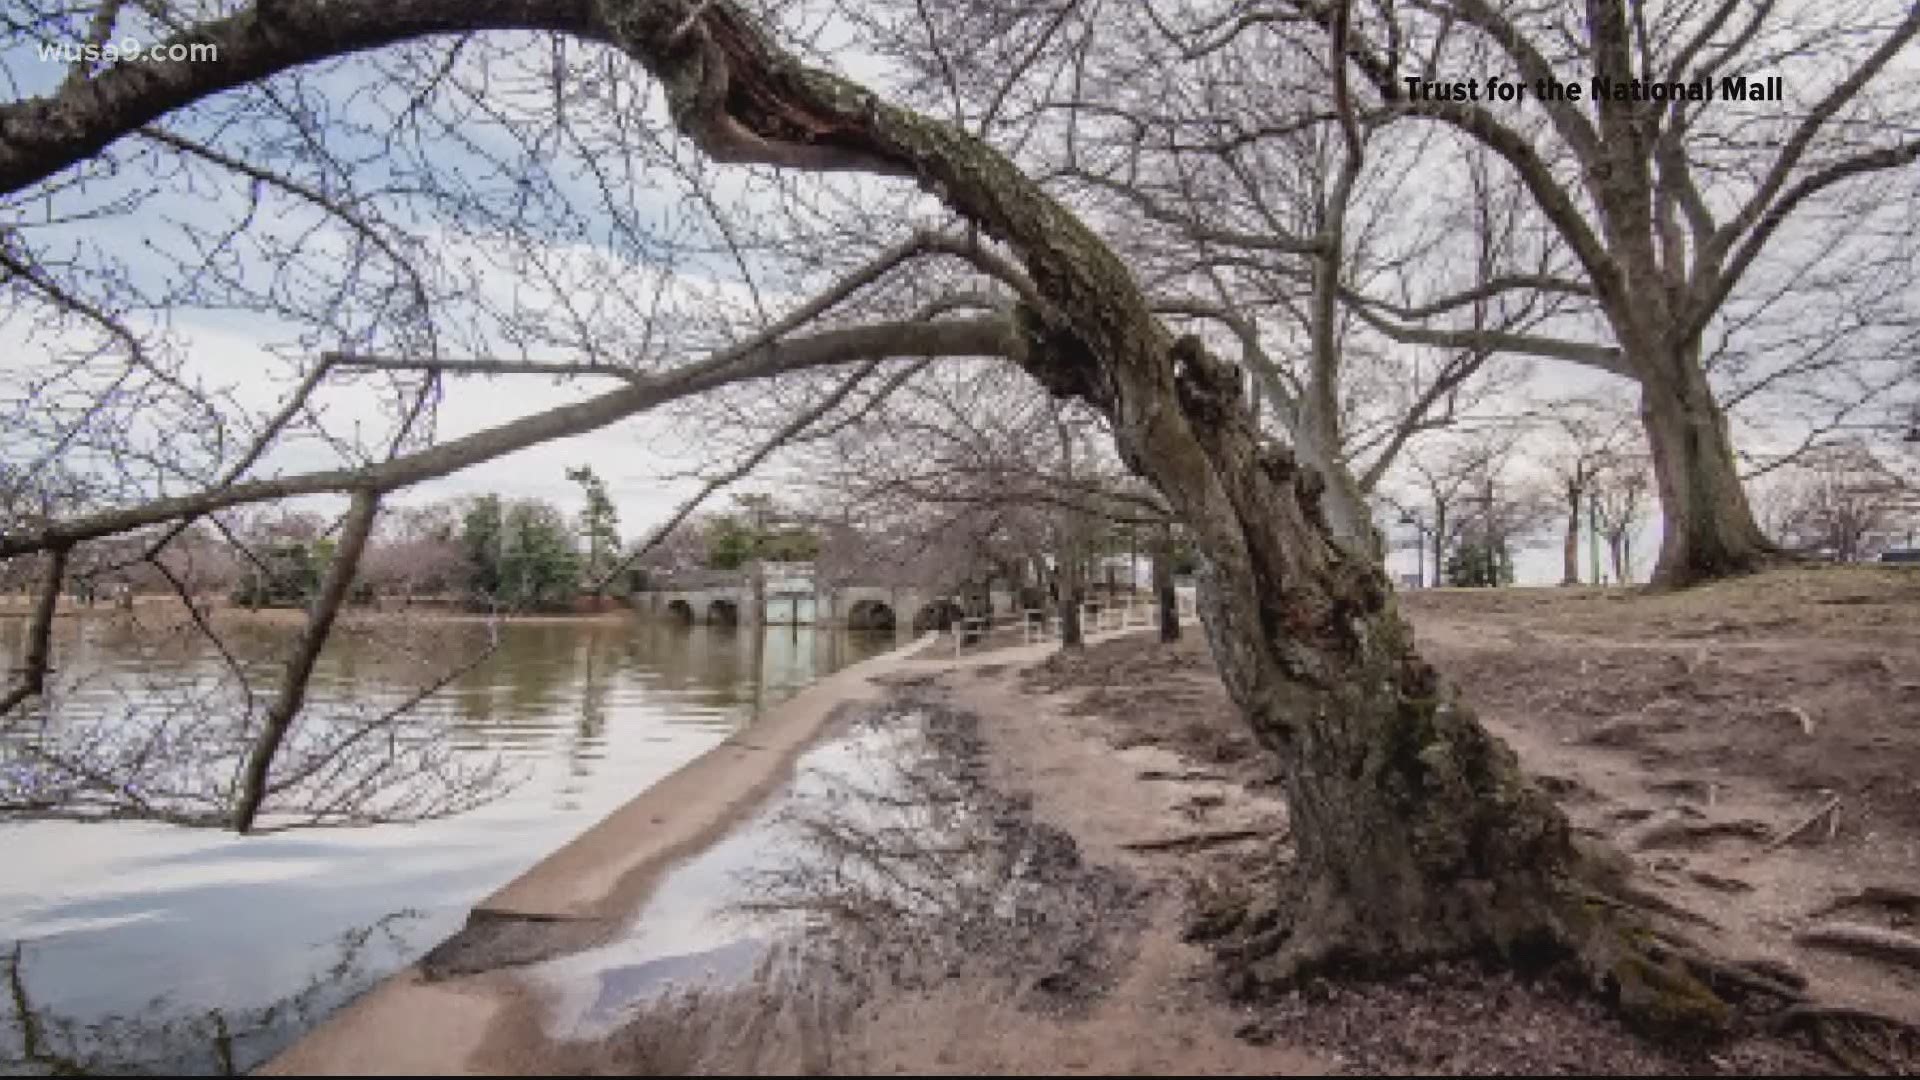 You can adopt a cherry blossom tree to protect and nurture it from the harsh effects of flooding at the Tidal Basin in D.C.